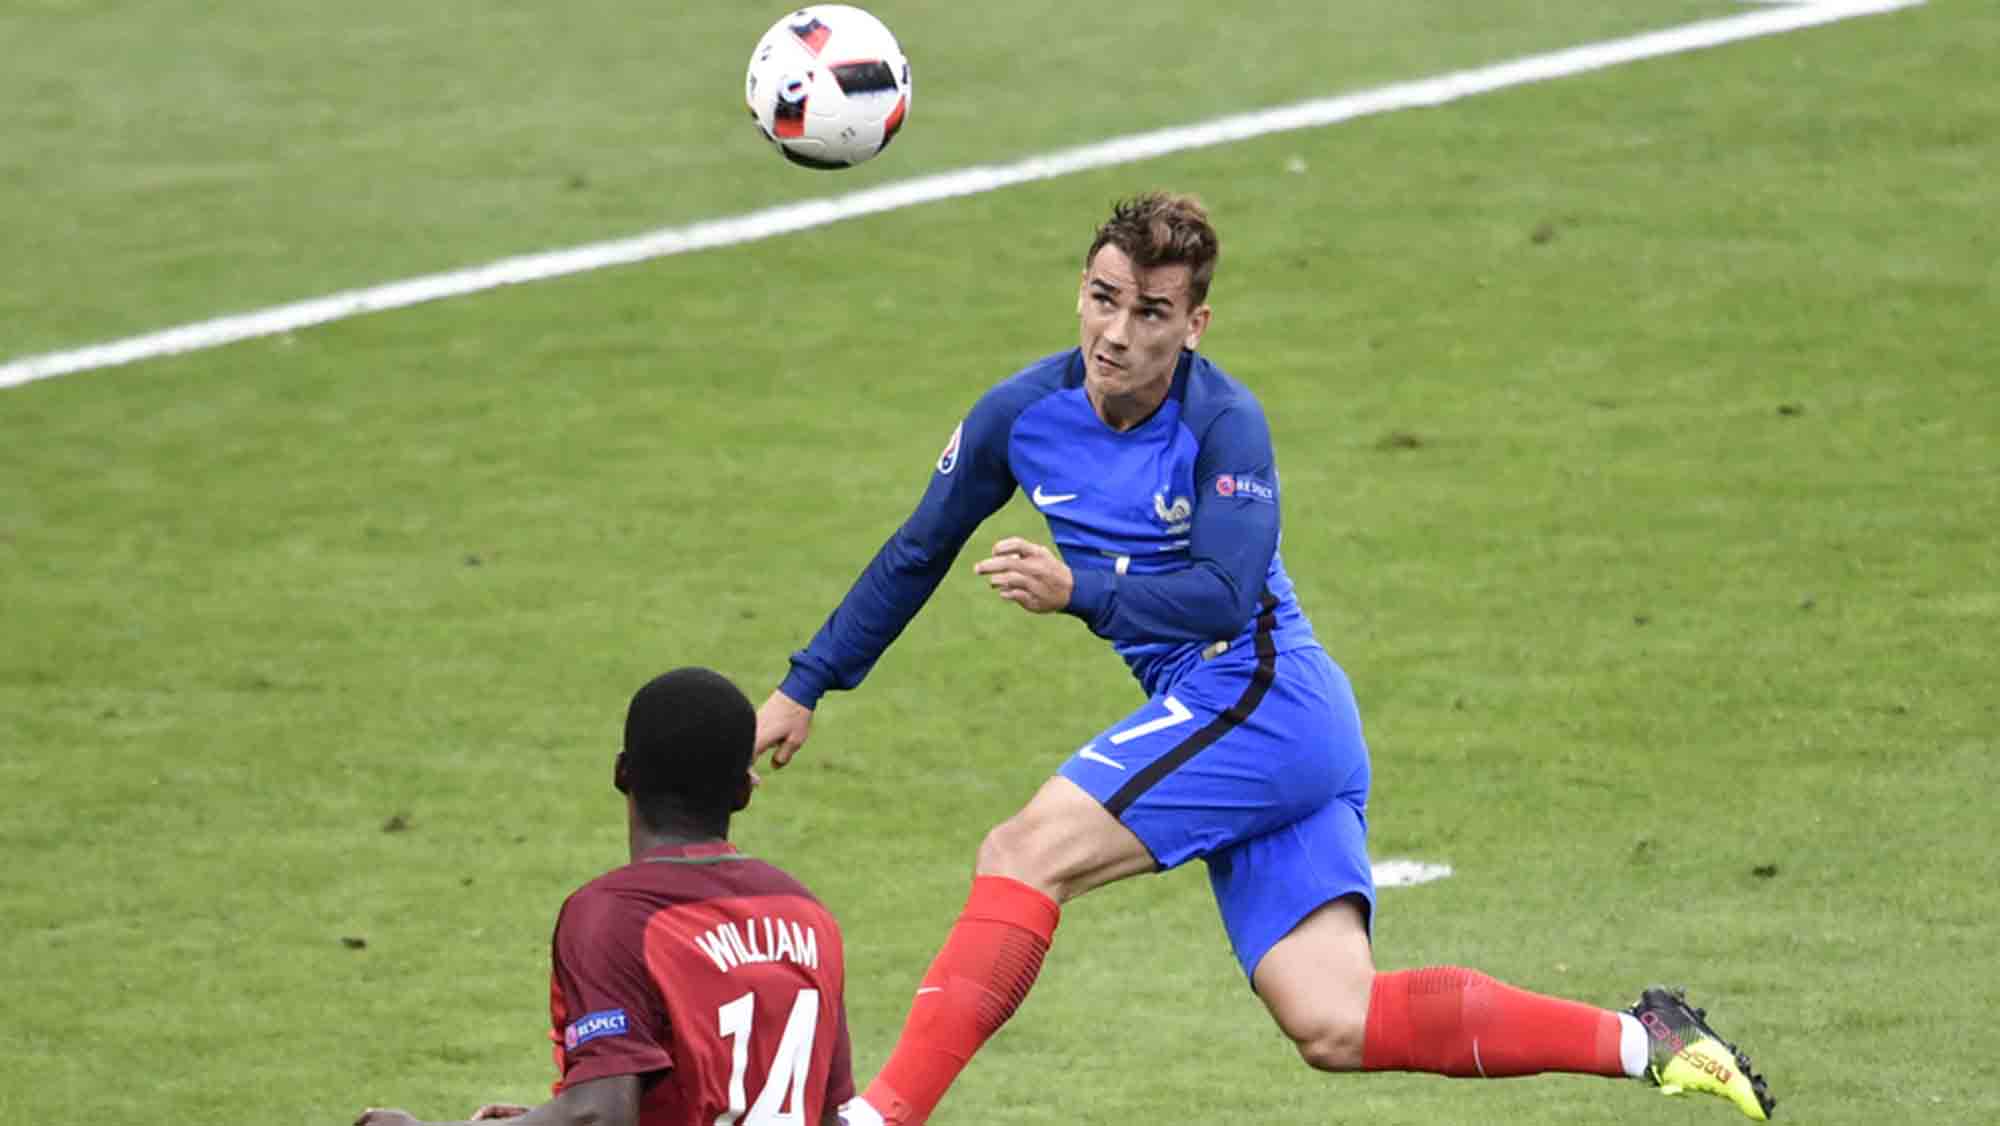 France's forward Antoine Griezmann (R) vies for the ball with Portugal's midfielder William Carvalho during the Euro 2016 final football match between Portugal and France at the Stade de France in Saint-Denis, north of Paris, on July 10, 2016. / AFP / PHILIPPE LOPEZ (Photo credit should read PHILIPPE LOPEZ/AFP/Getty Images)